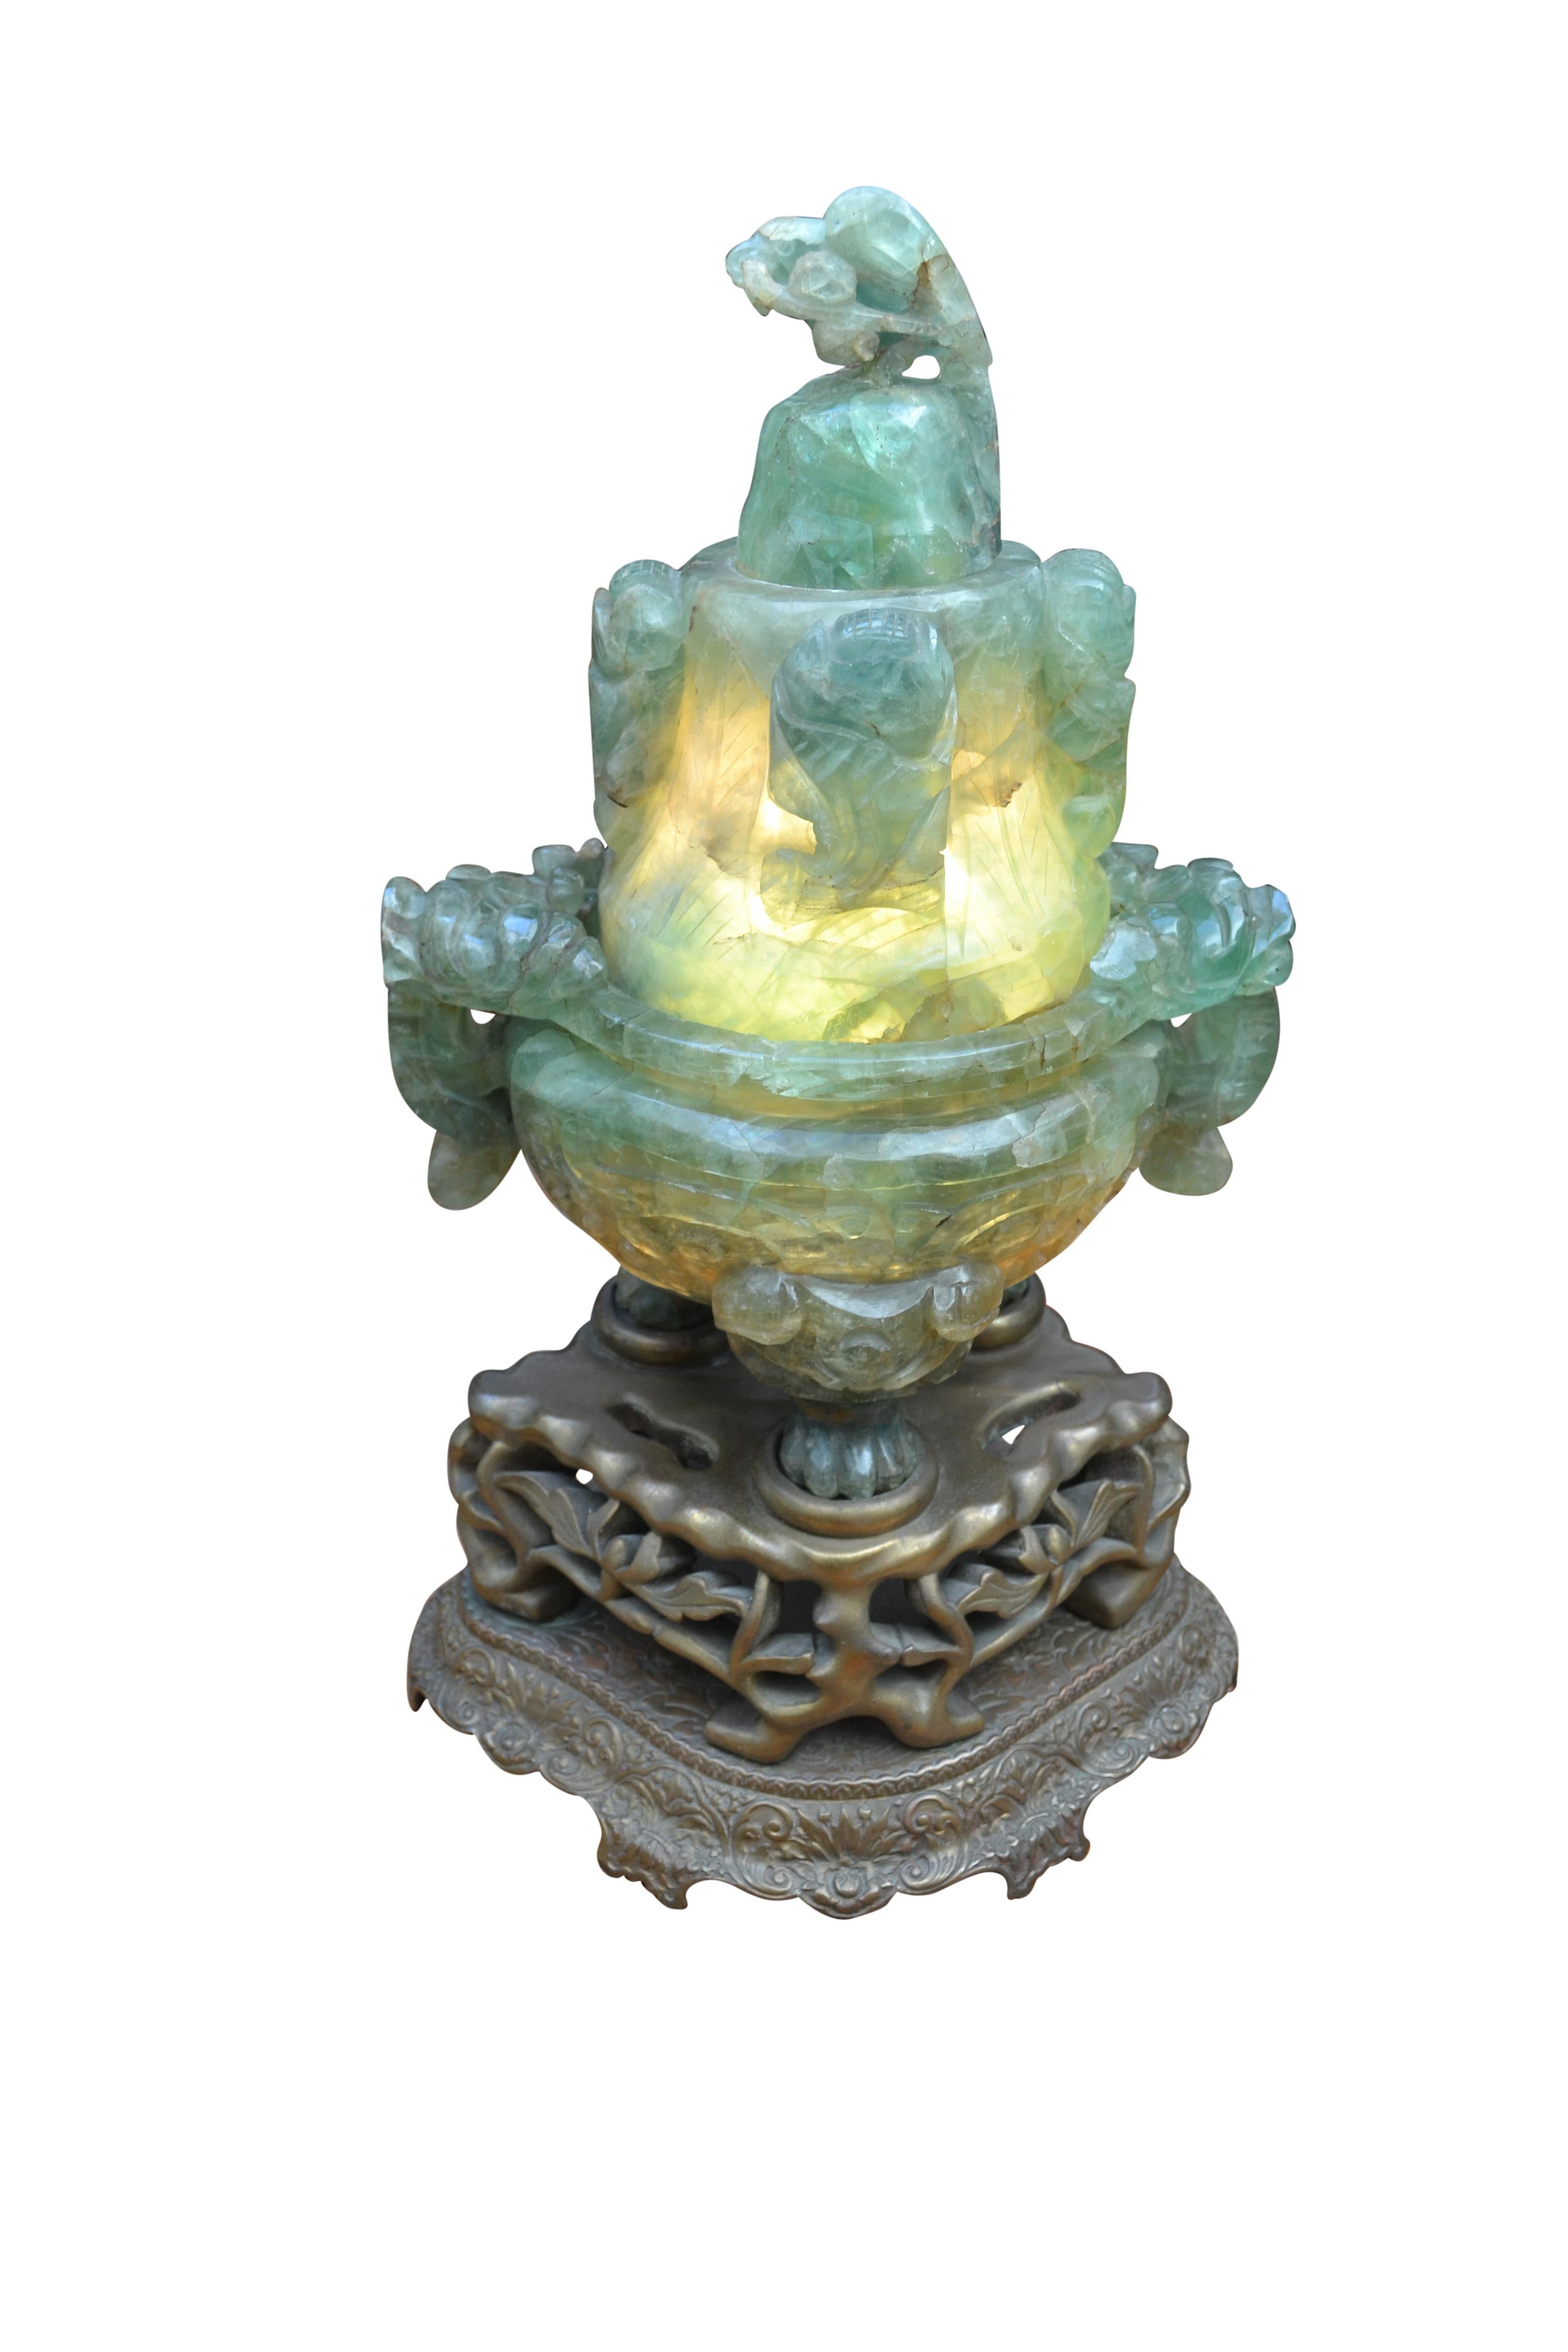 A large ‘flourite/quartz’ lamp, carved with Asian motives and lit from the inside; referred to as a tripod lidded incense burner censer likely from the Republic Period, (1912-1949), carved in the Archaistic style with tapering circular sides